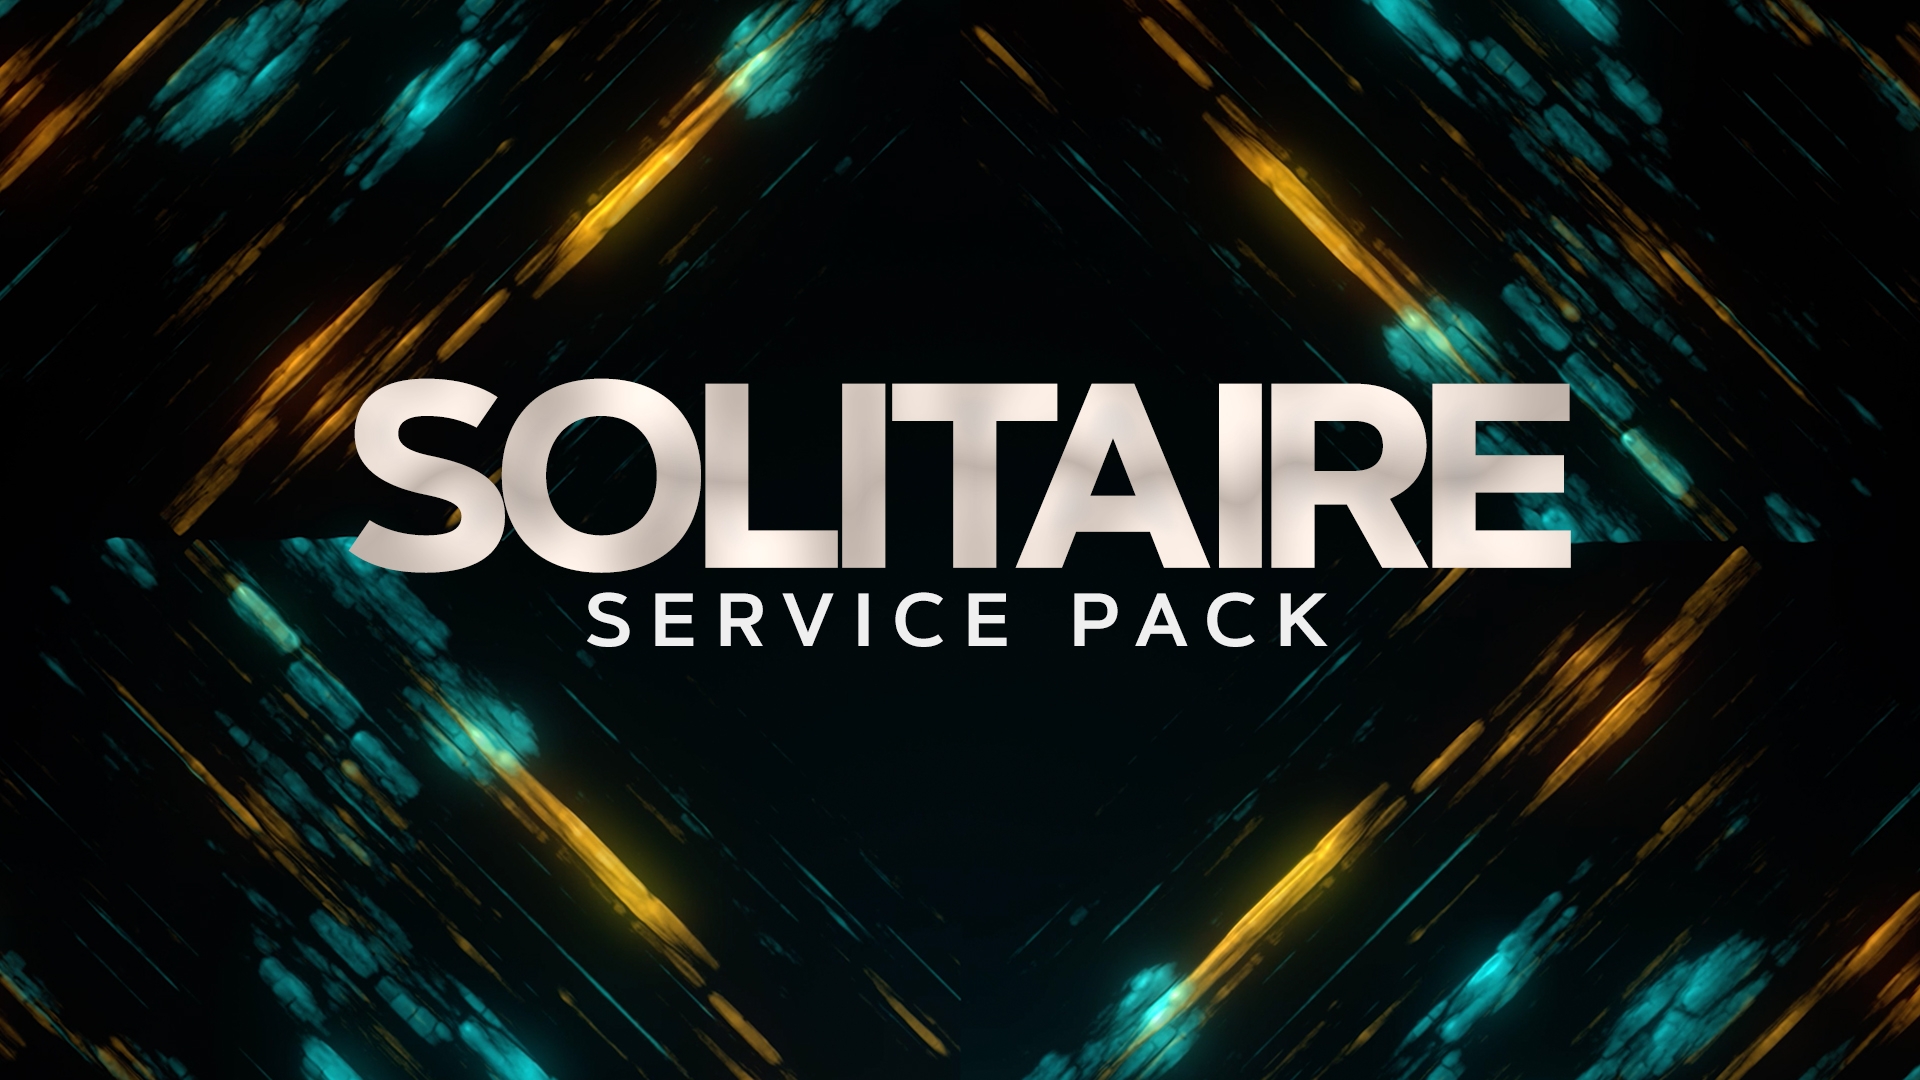 Solitaire Service Pack